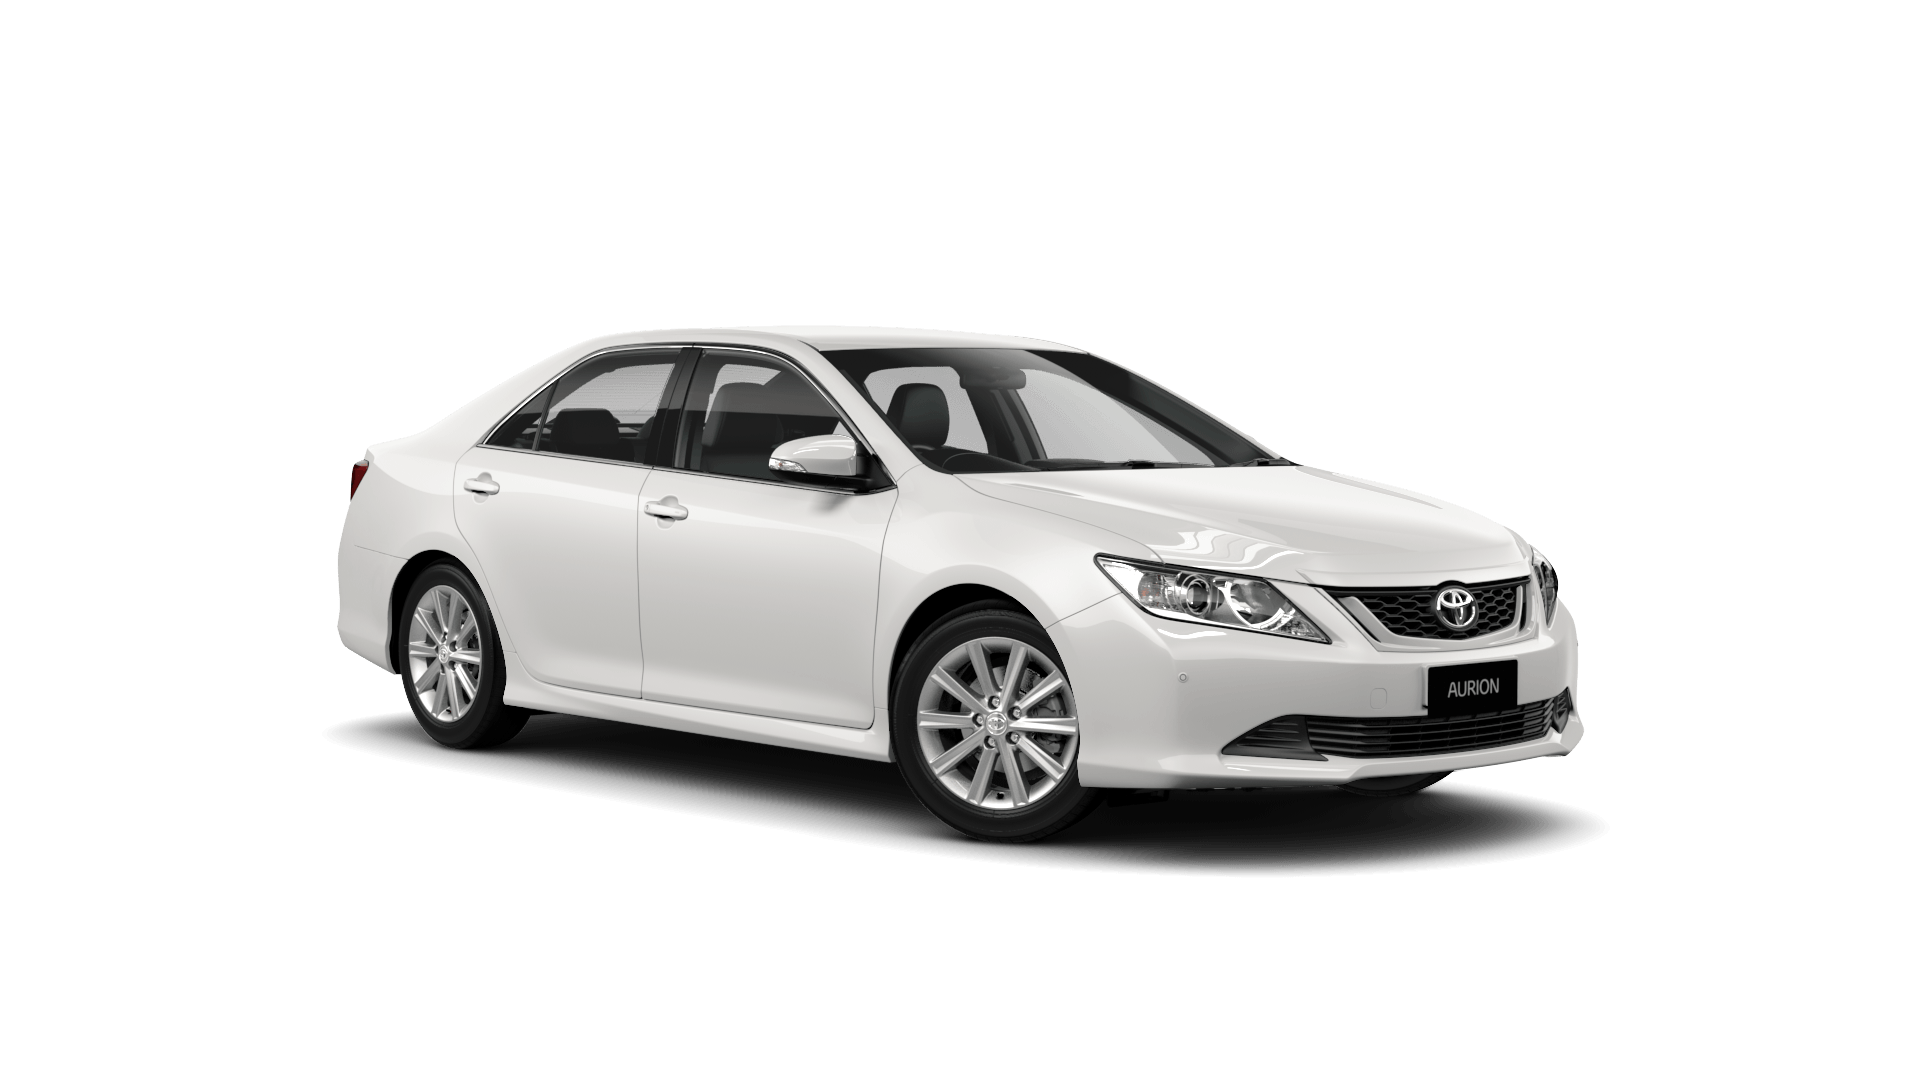 2010 Toyota Aurion — Car And Scooter Rentals in Nelson Bay, NSW